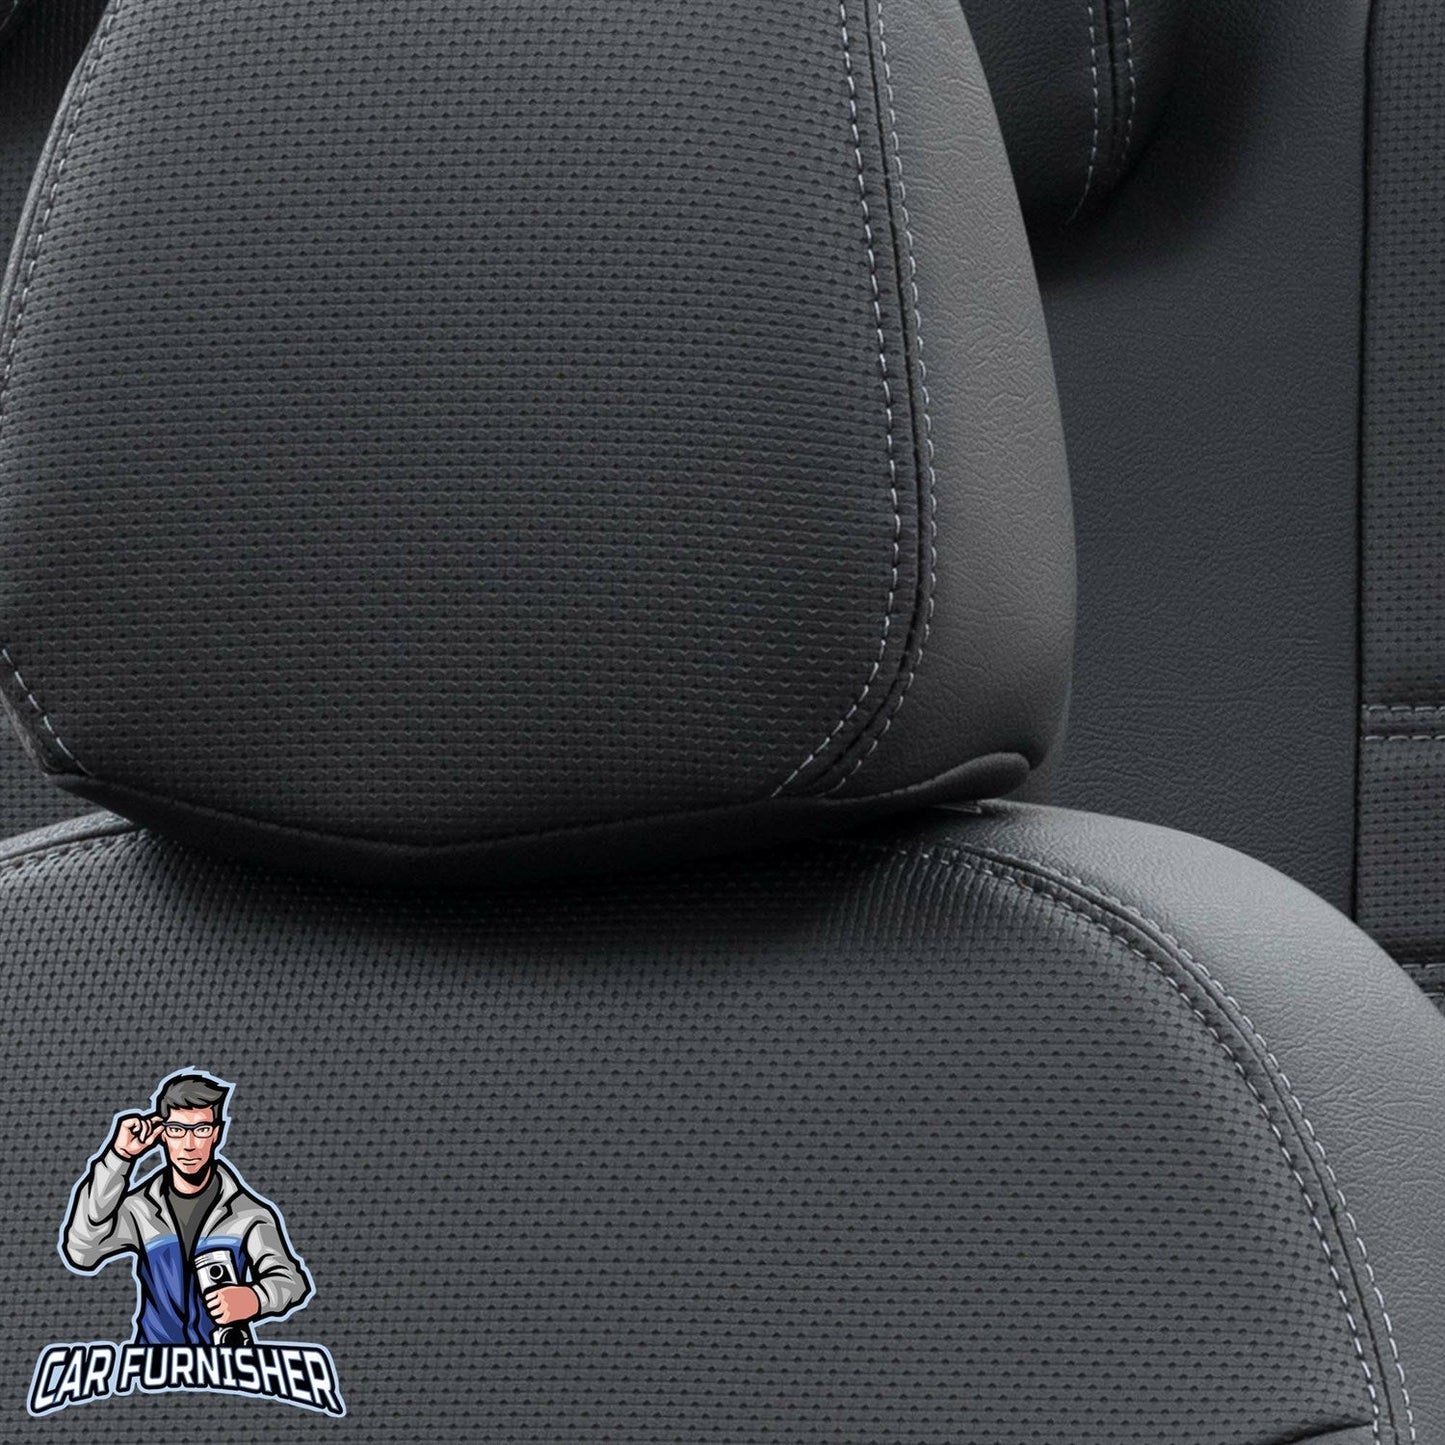 Renault Modus Seat Covers New York Leather Design Black Leather